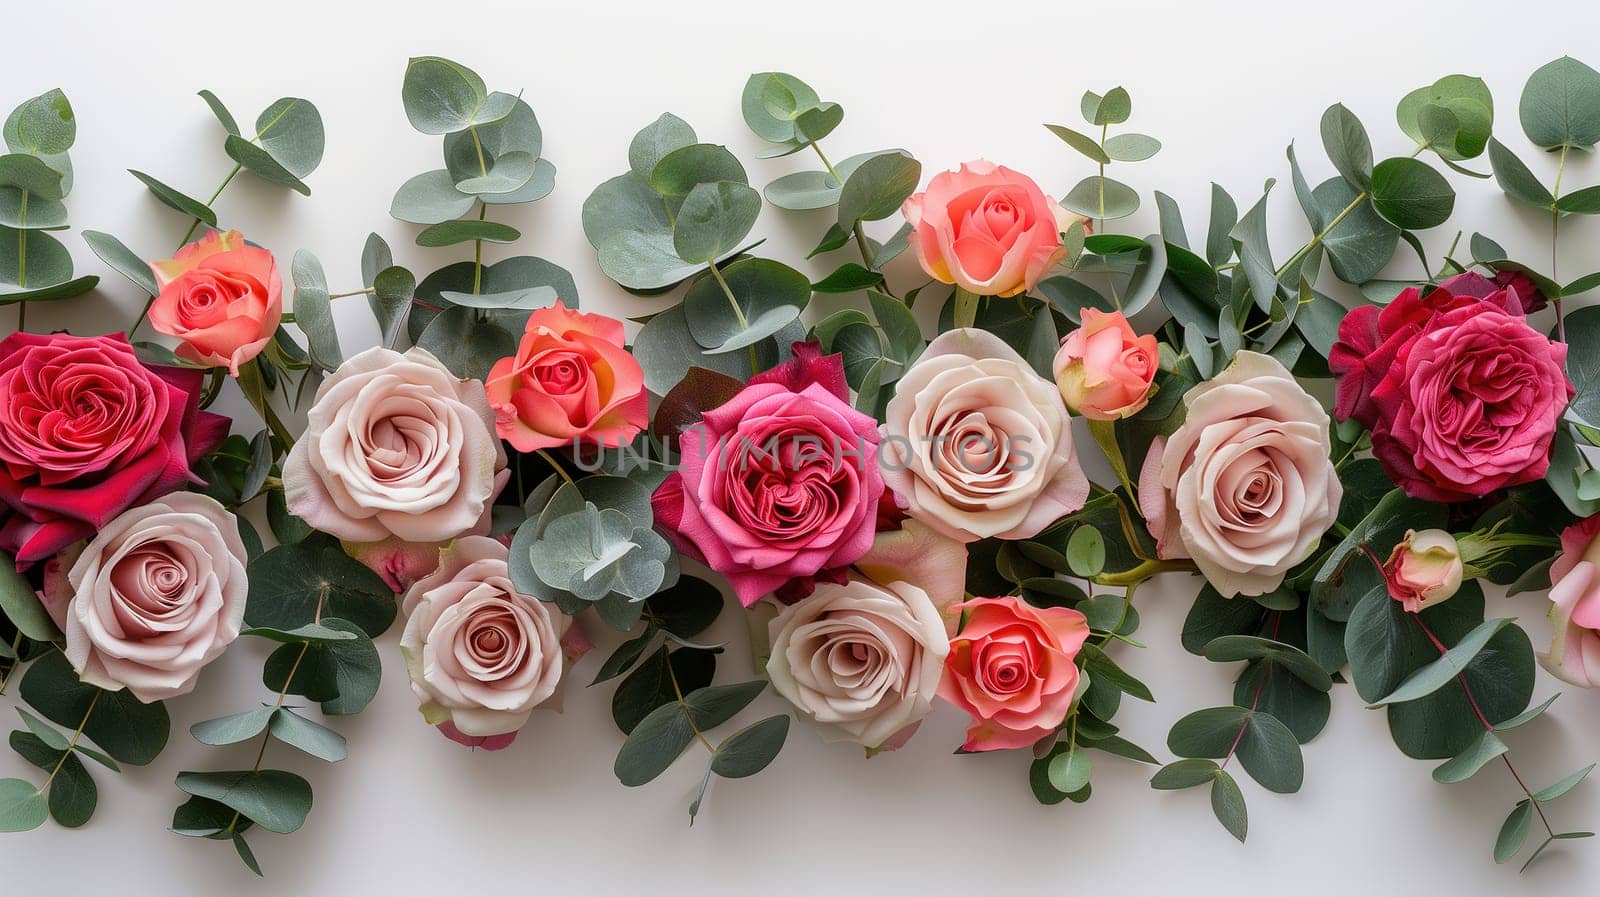 A variety of colorful flowers are arranged neatly on a wall, creating a vibrant and lively display. The blooms range from roses to daisies, ensuring a diverse and visually appealing composition.